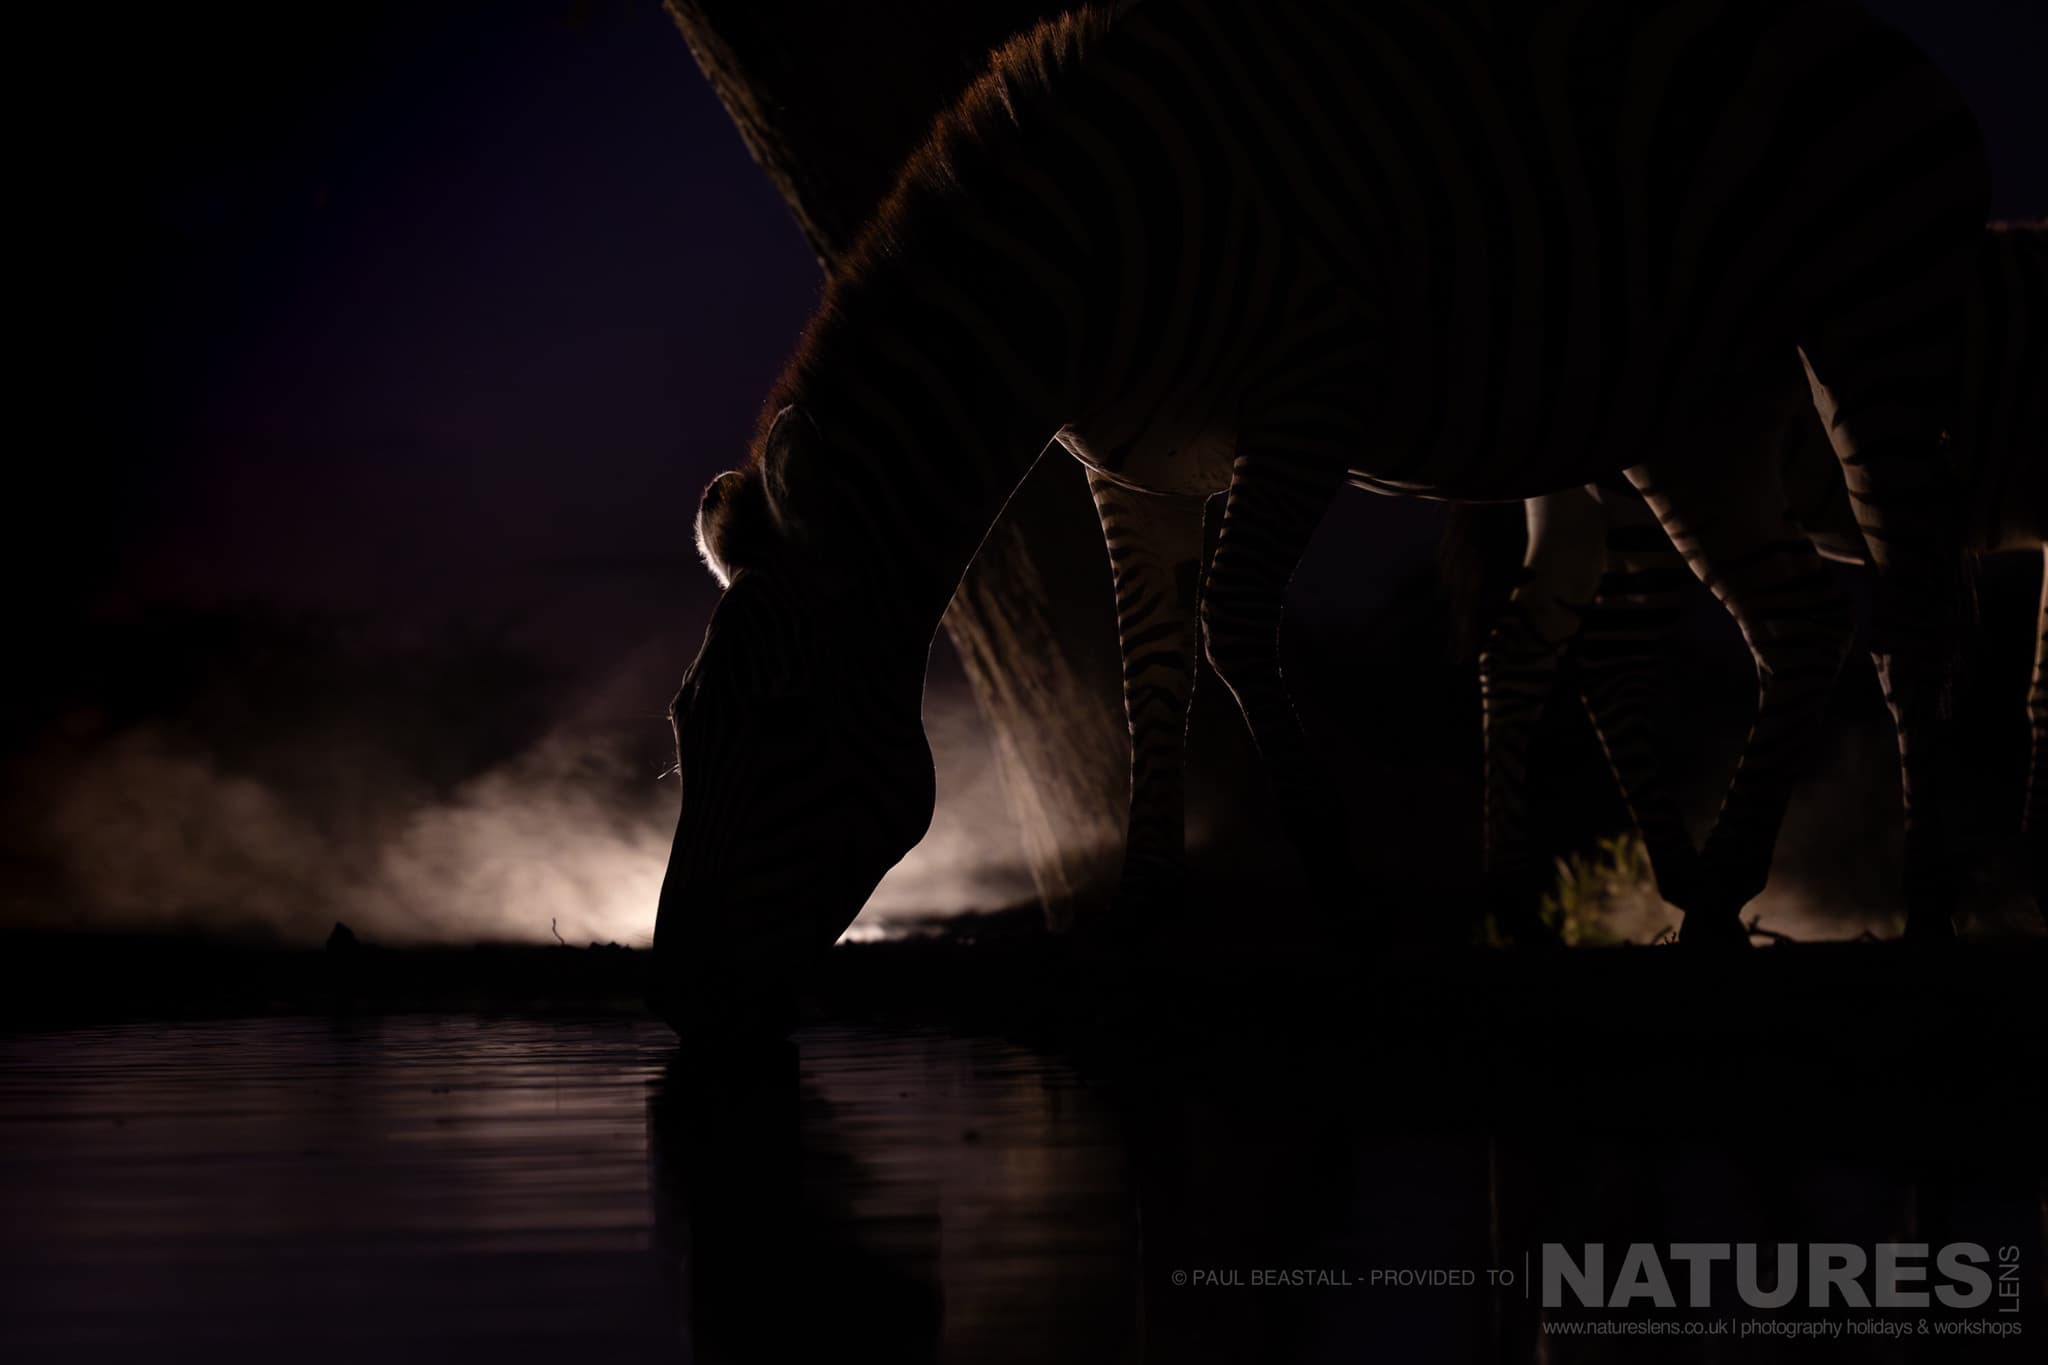 Backlit Zebra Drinking From The Waterhole At Night Photographed By Paul Beastall During A Photography Holiday In The Southern Great Rift Valley With Natureslens